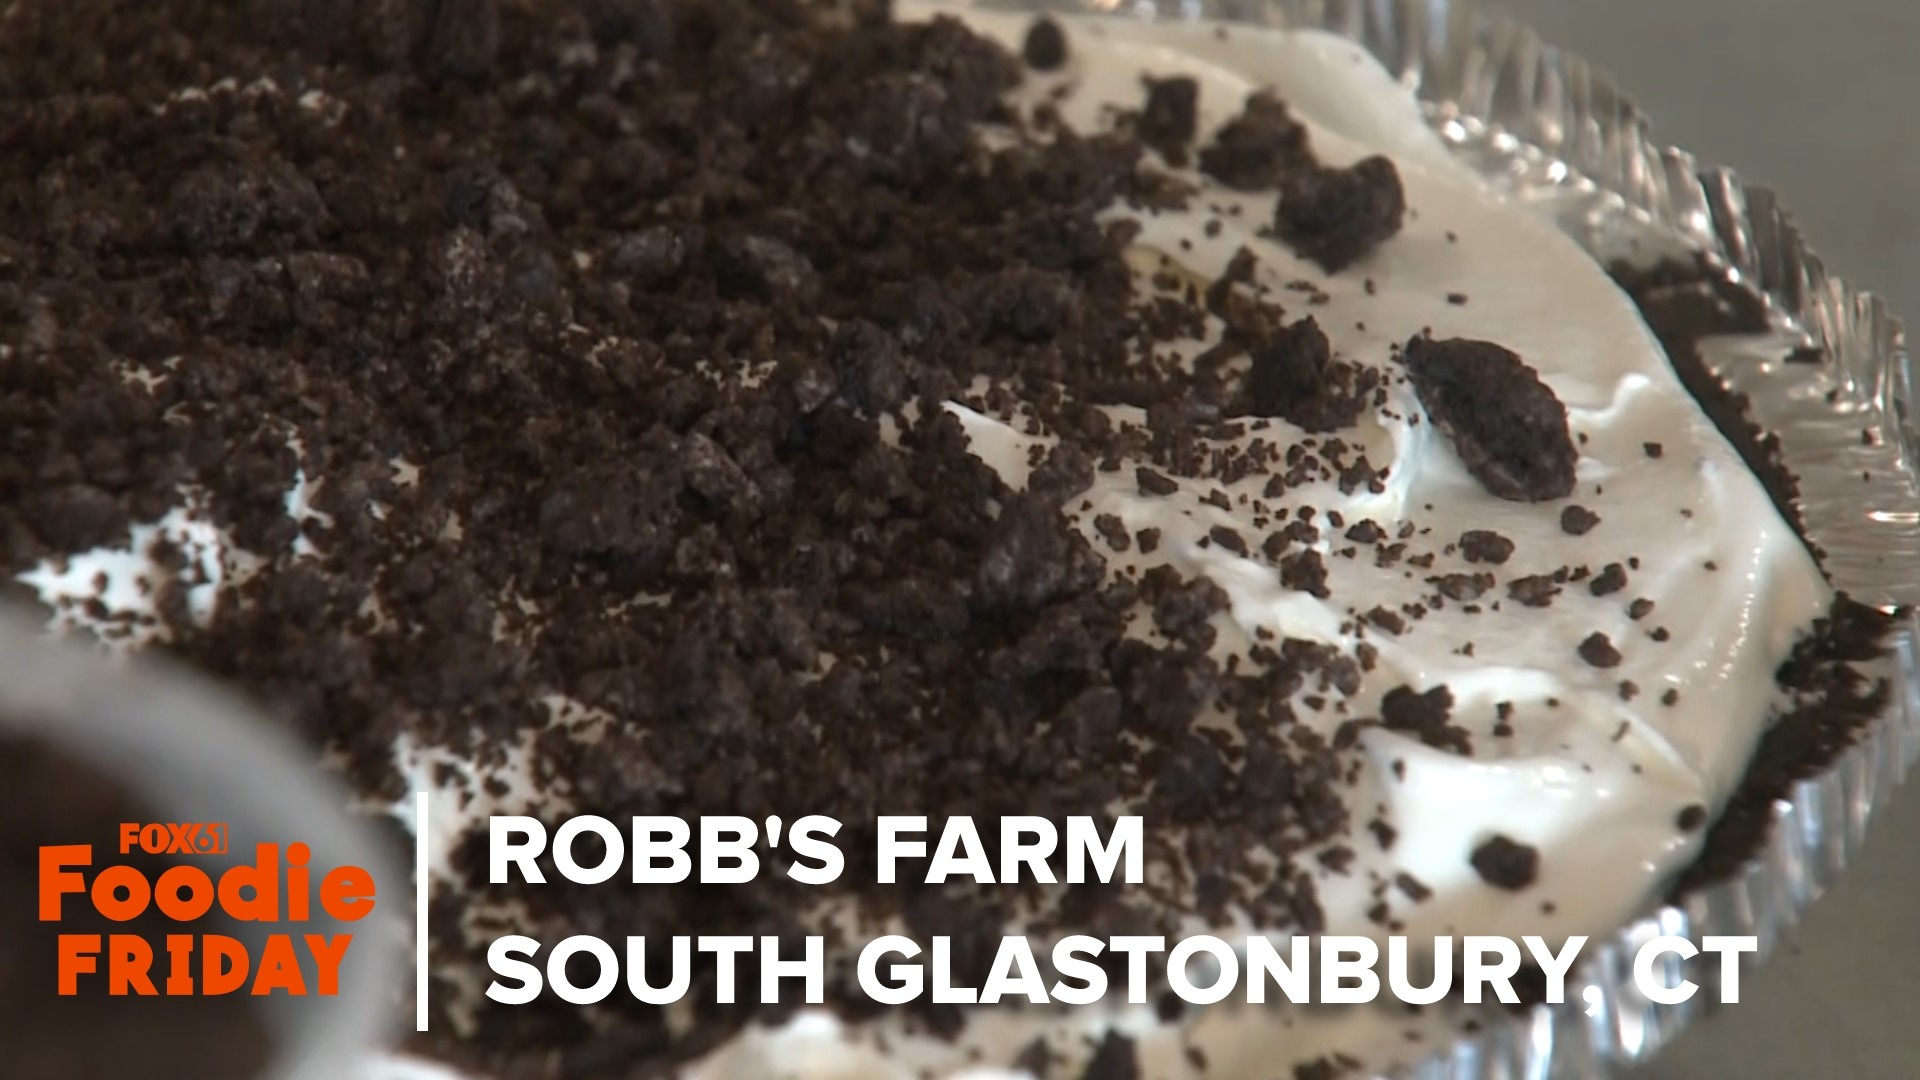 For this week's Foodie Friday, FOX61's Rachel Piscitelli visited Robb's Farm in South Glastonbury to try some of the farm fresh ice cream and to see the goats.